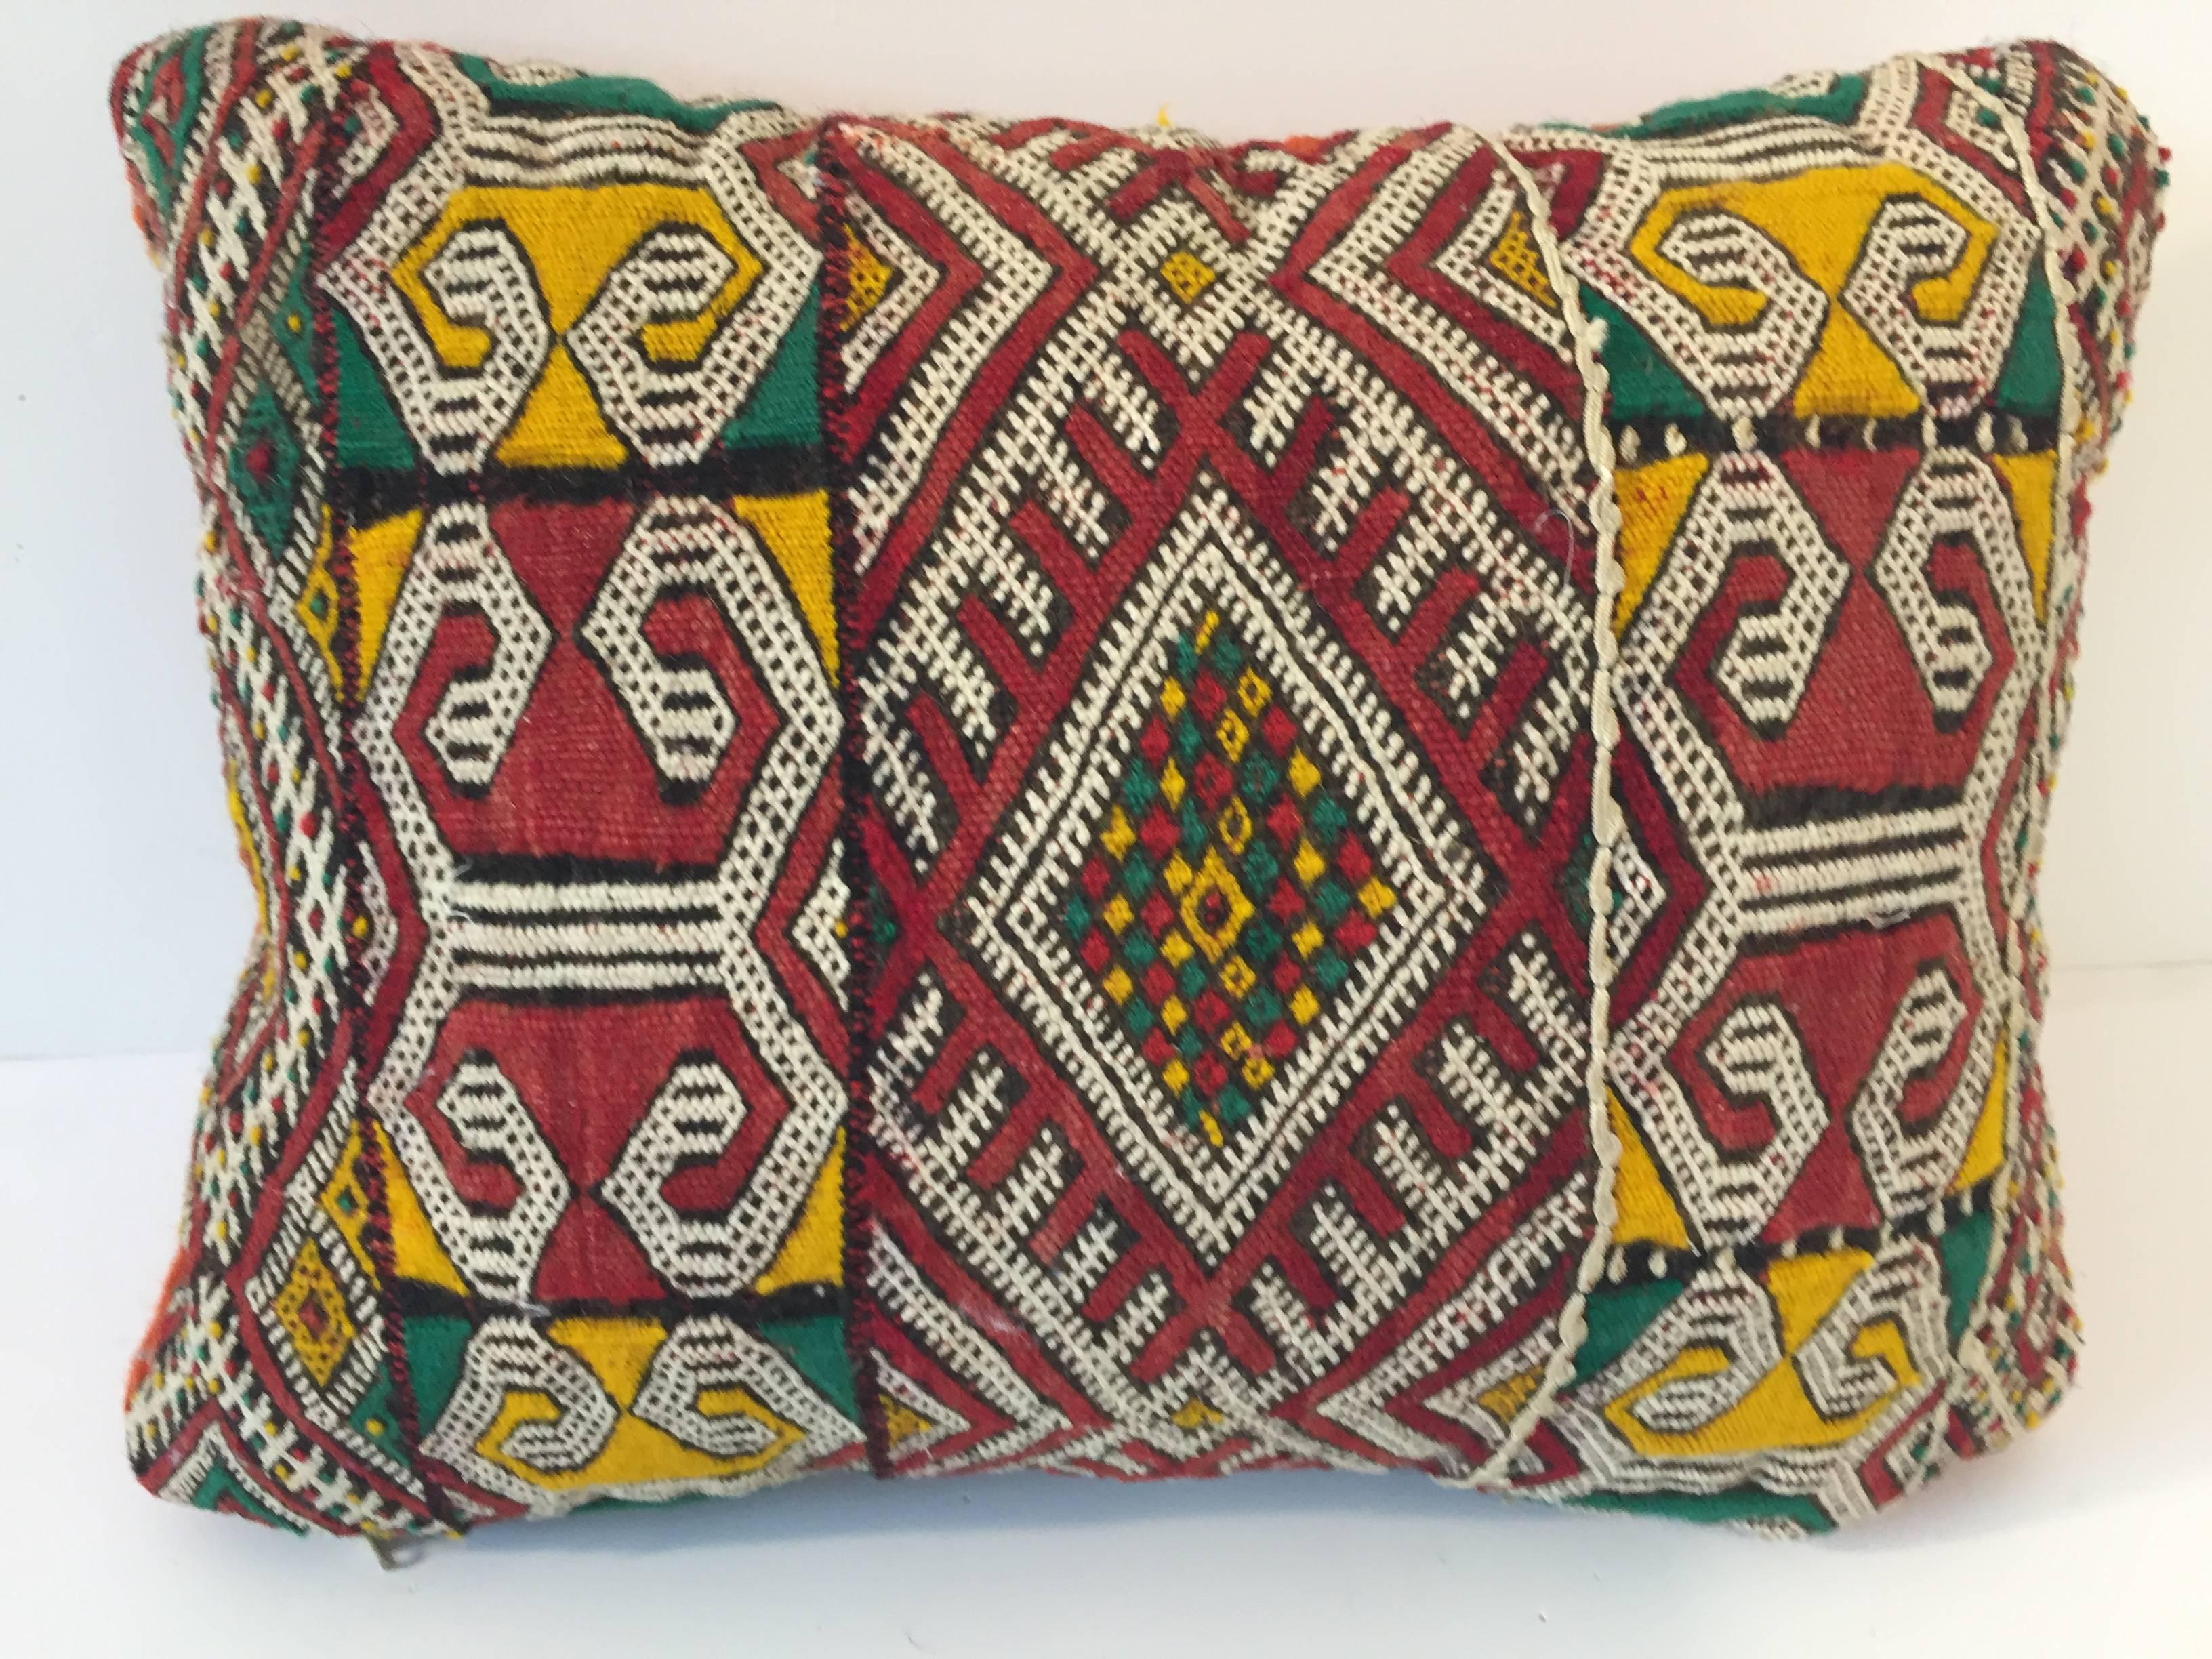 Moroccan Berber pillow red with geometric tribal designs.
Handwoven tribal throw pillow made from a vintage flat-weave rug. 
The front and the back are made from a different rug, front is more elaborate and back is burnt orange. 
Handwoven by